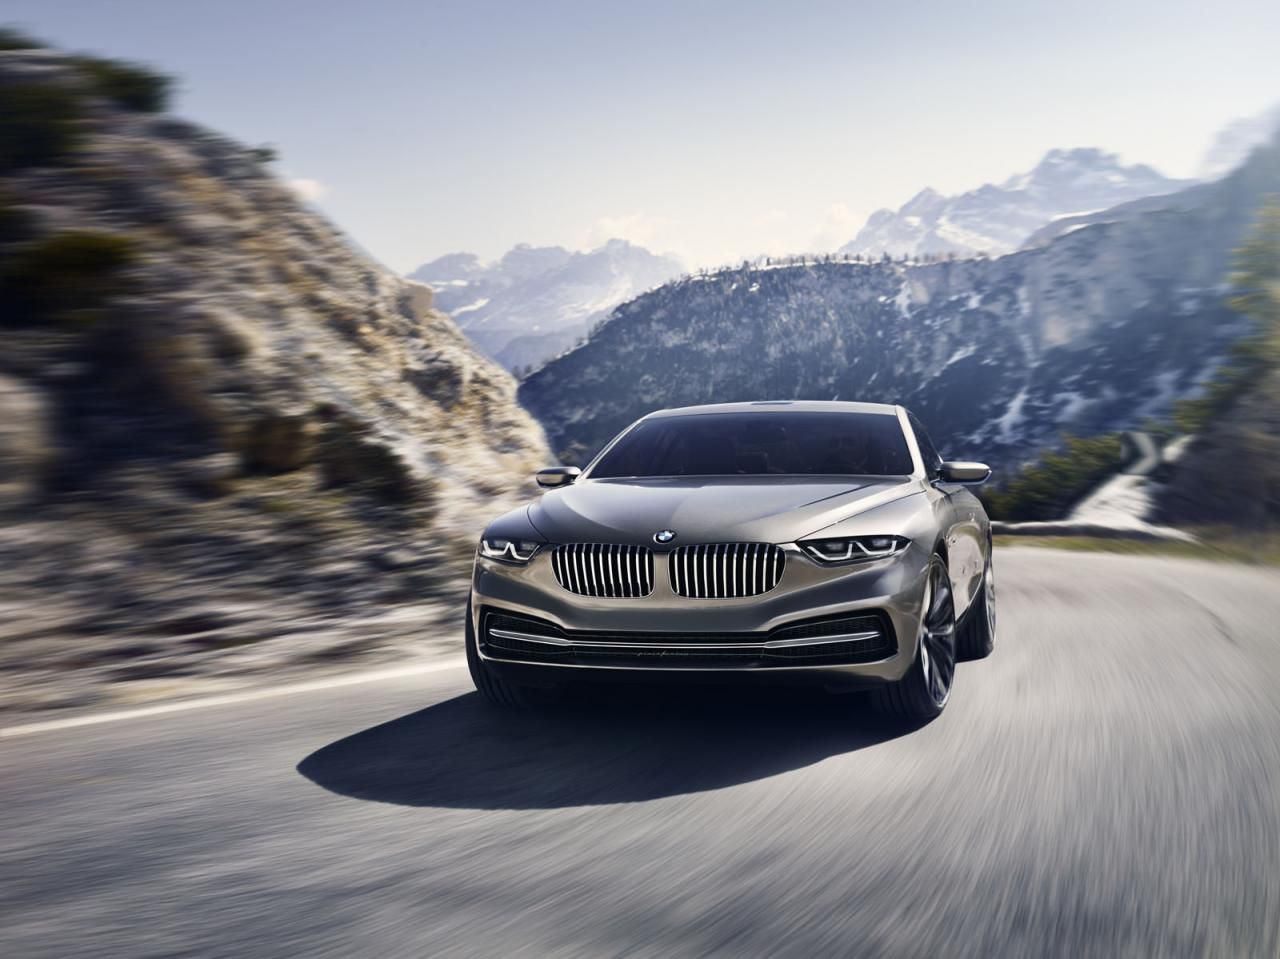 BMW GRAN LUSSO COUPE CONCEPT GALER